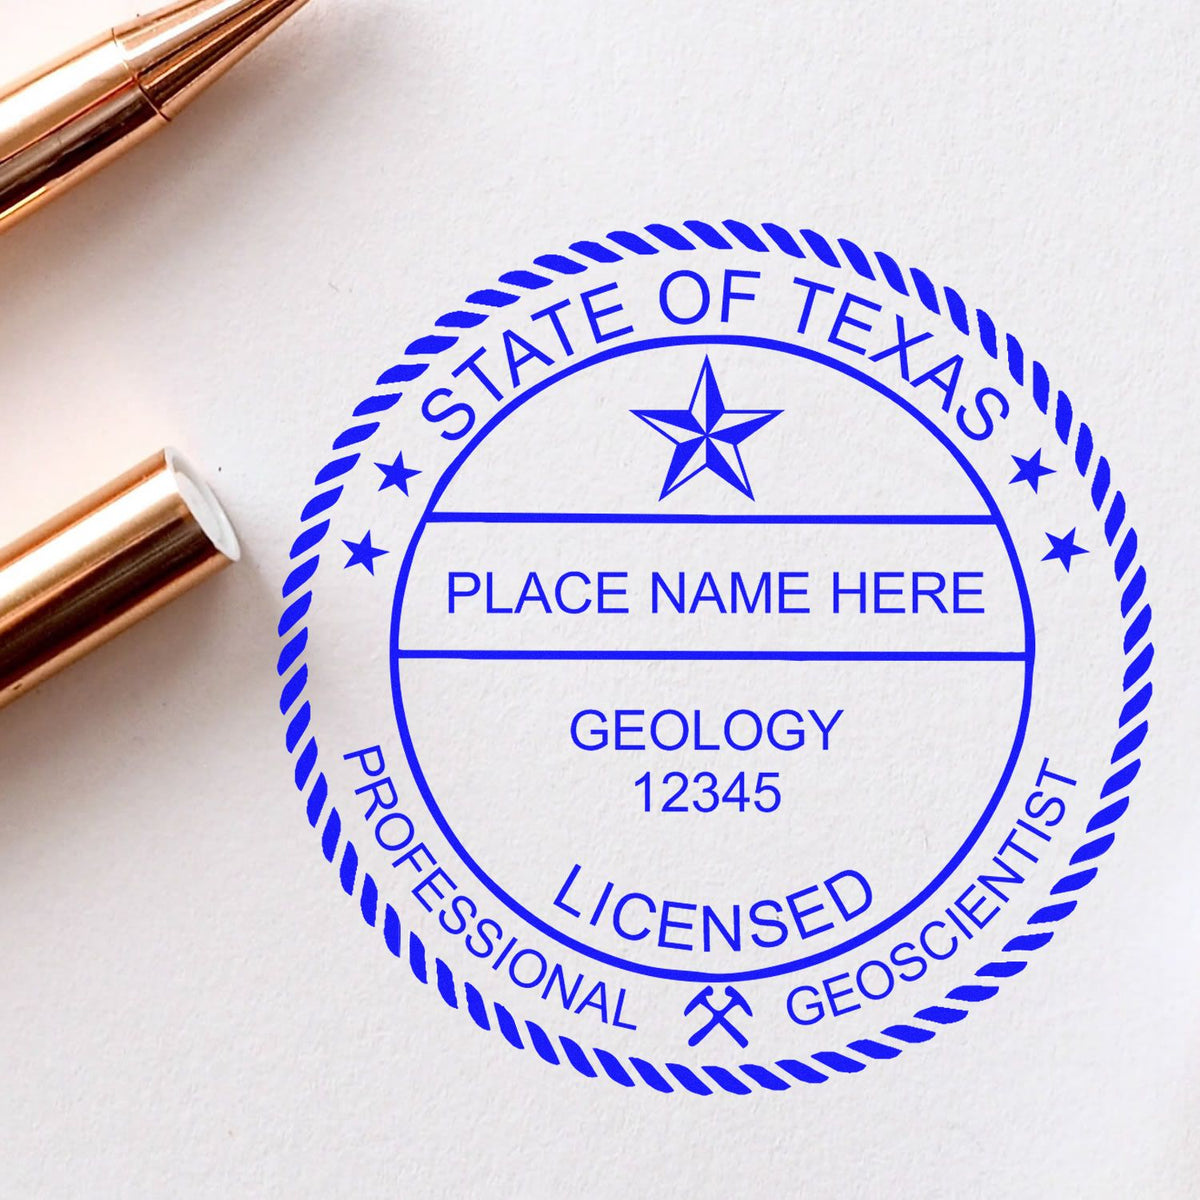 An alternative view of the Slim Pre-Inked Texas Professional Geologist Seal Stamp stamped on a sheet of paper showing the image in use